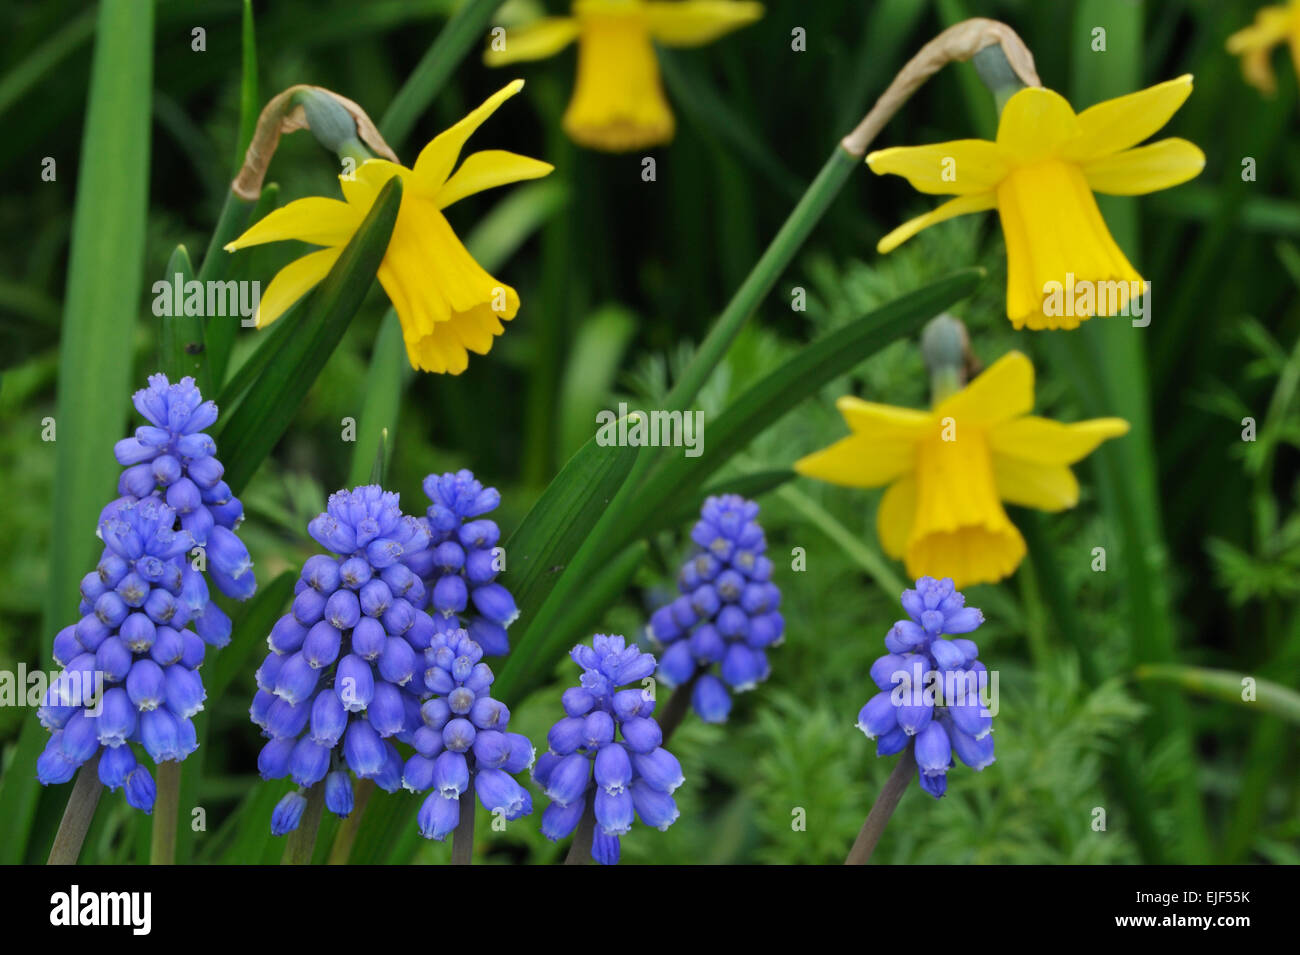 Common grape hyacinths (Muscari botryoides  / Hyacinthus botryoides L.) and daffodils in flower garden Stock Photo